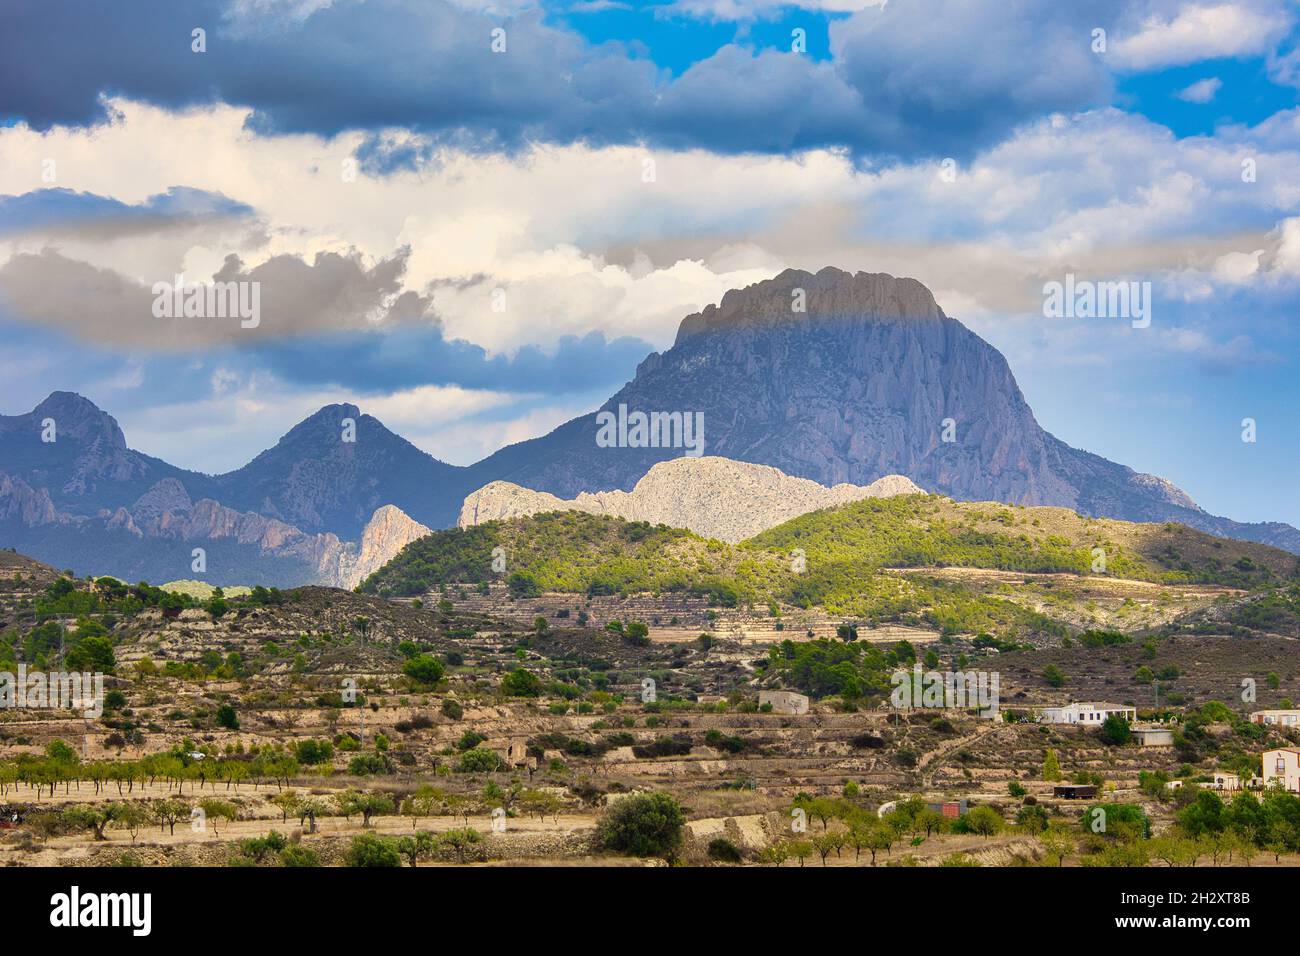 Mountain valley overlooking the top of the Cabeco D'or mountains. Spain, Alicante province Stock Photo